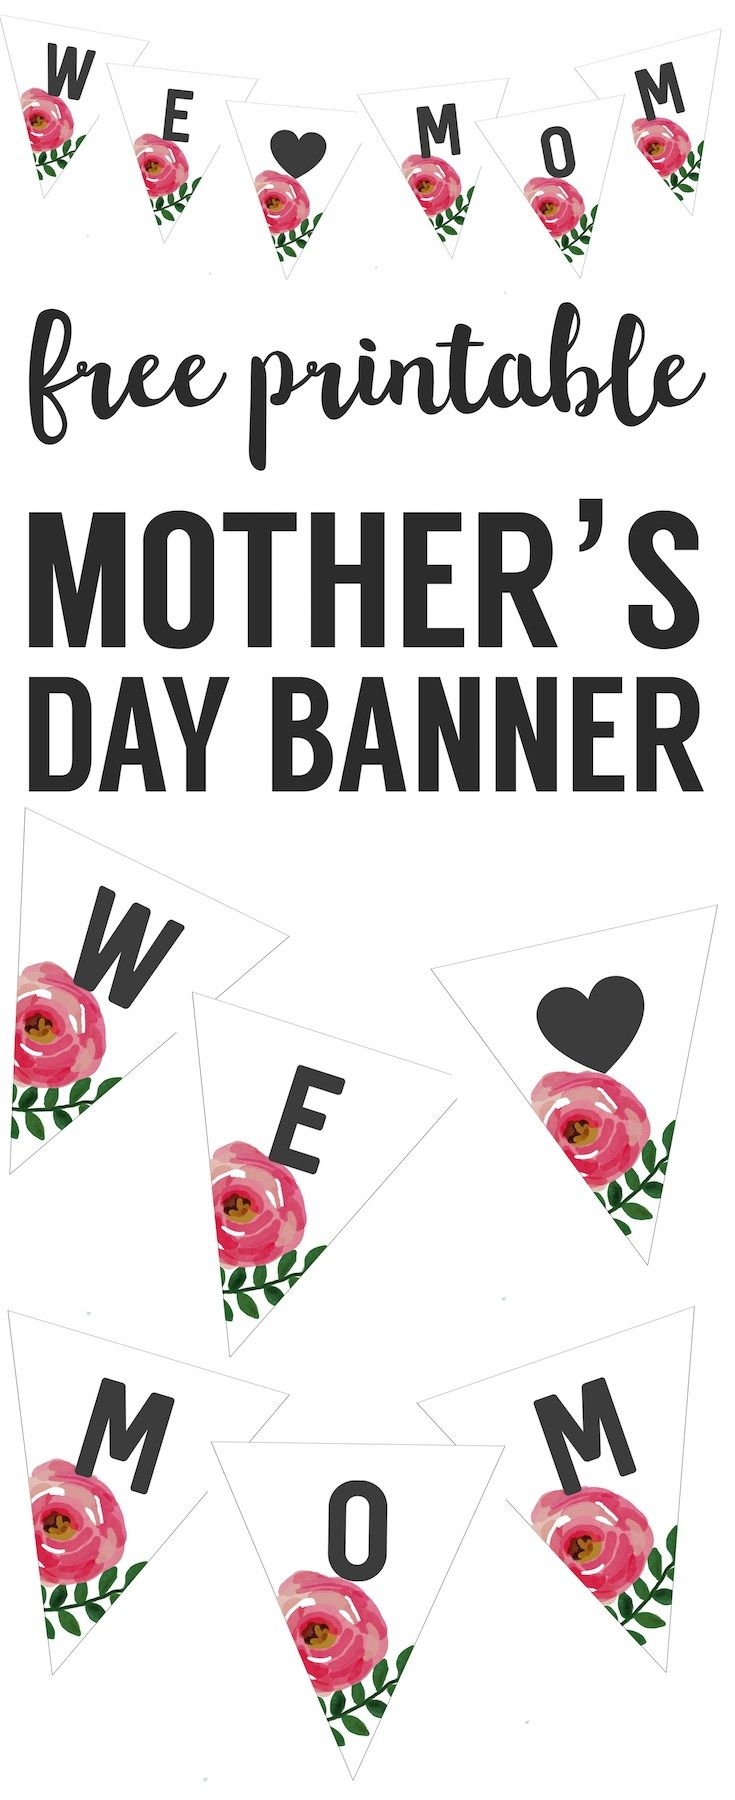 Mother s Day Banner Free Printable Paper Trail Design Mother s Day Banner Happy Mothers Day Banner Diy Mother s Day Crafts